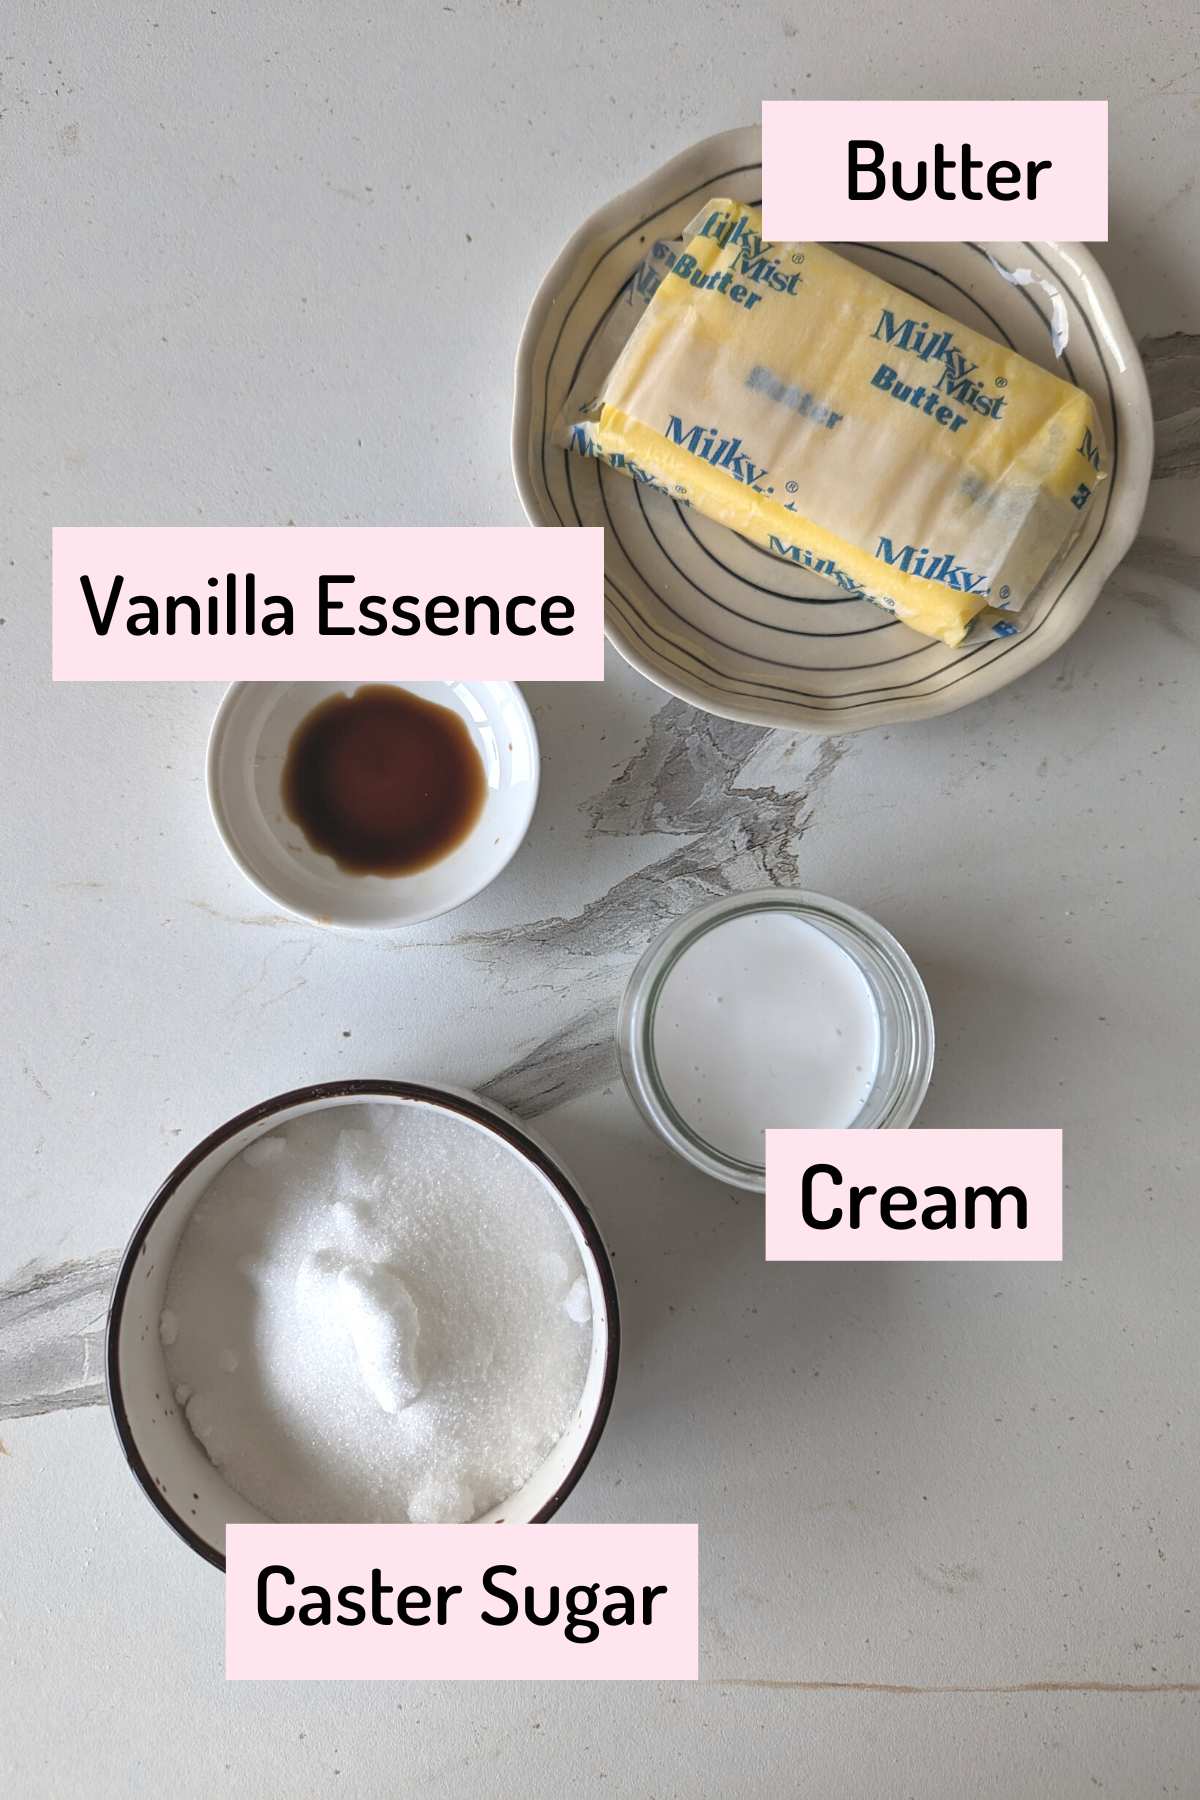 ingredients needed to make buttercream frosting recipe